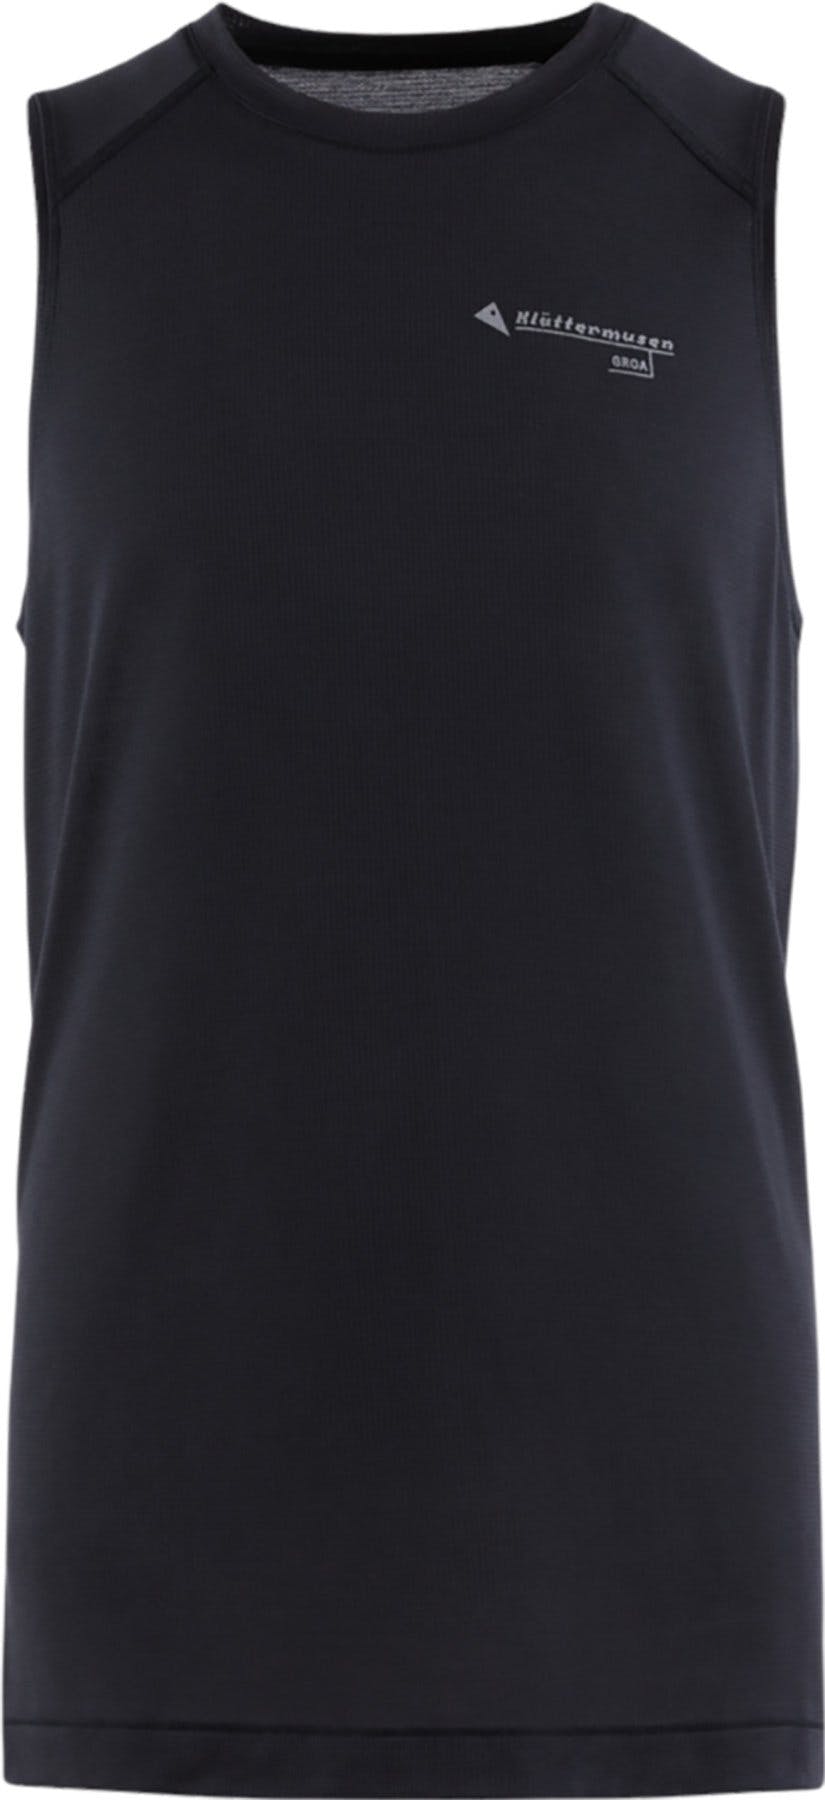 Product image for Groa Tank Top - Men's